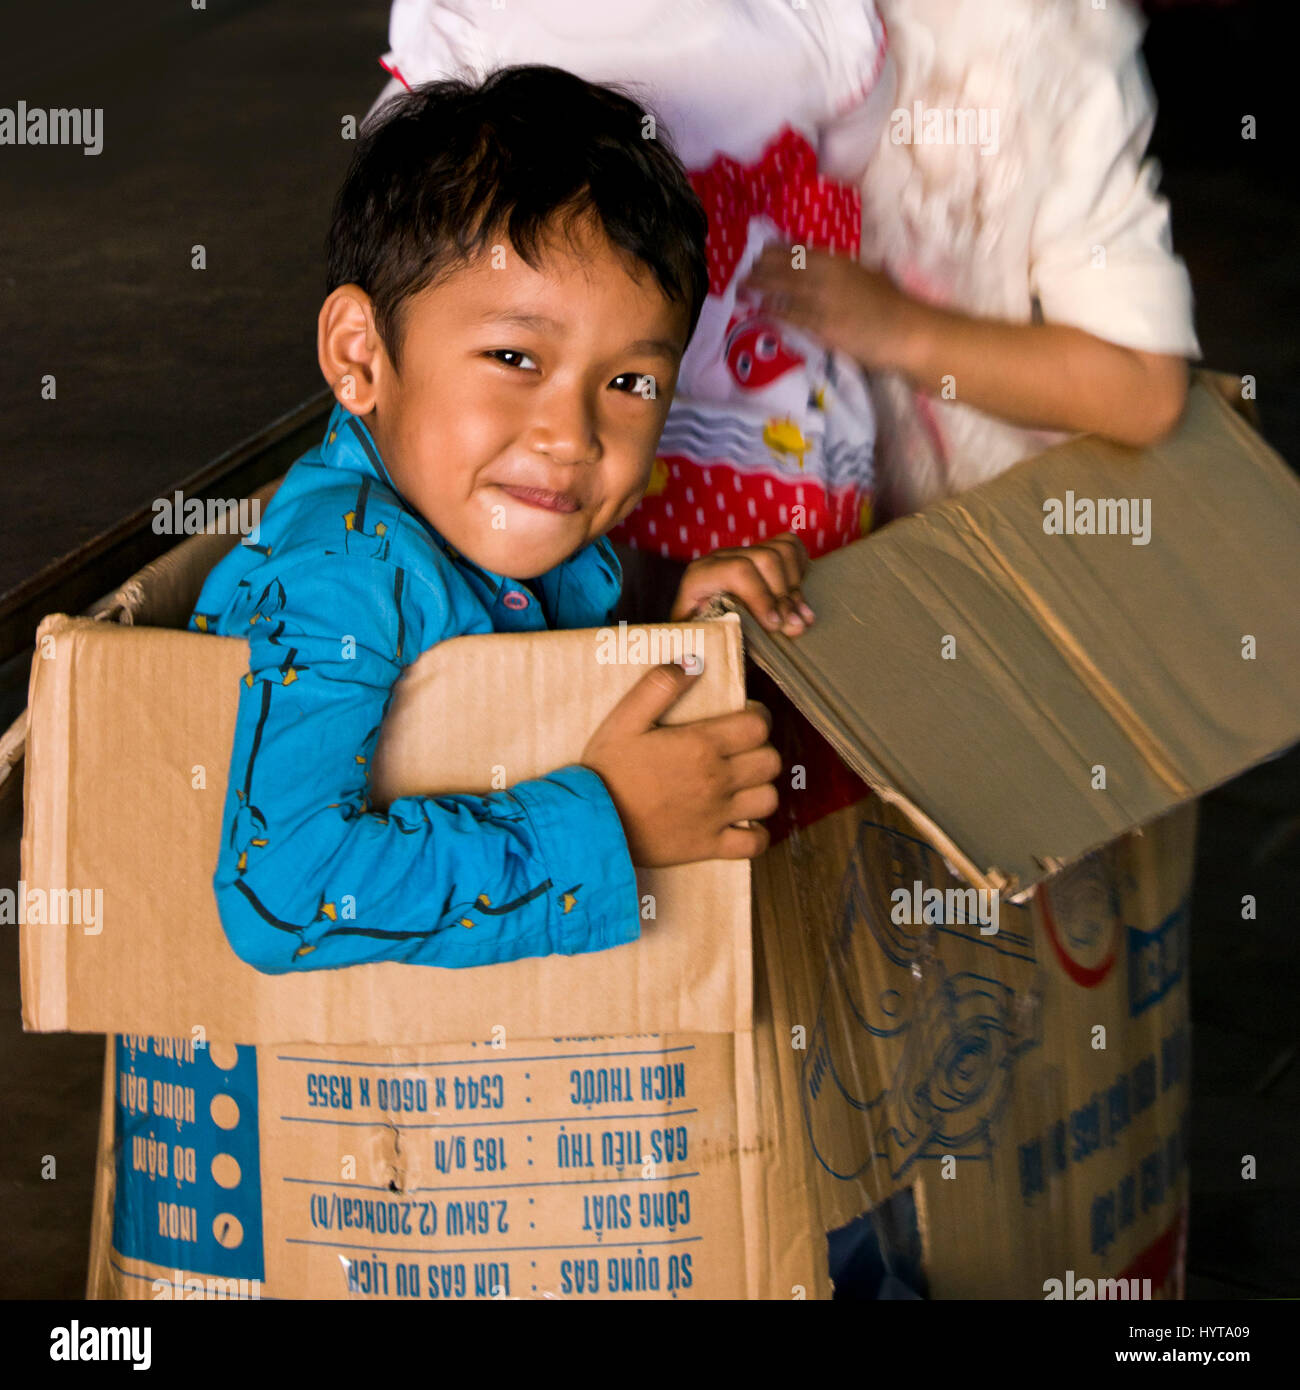 Square portrait of a young boy playing inside a cardboard box in Cambodia. Stock Photo